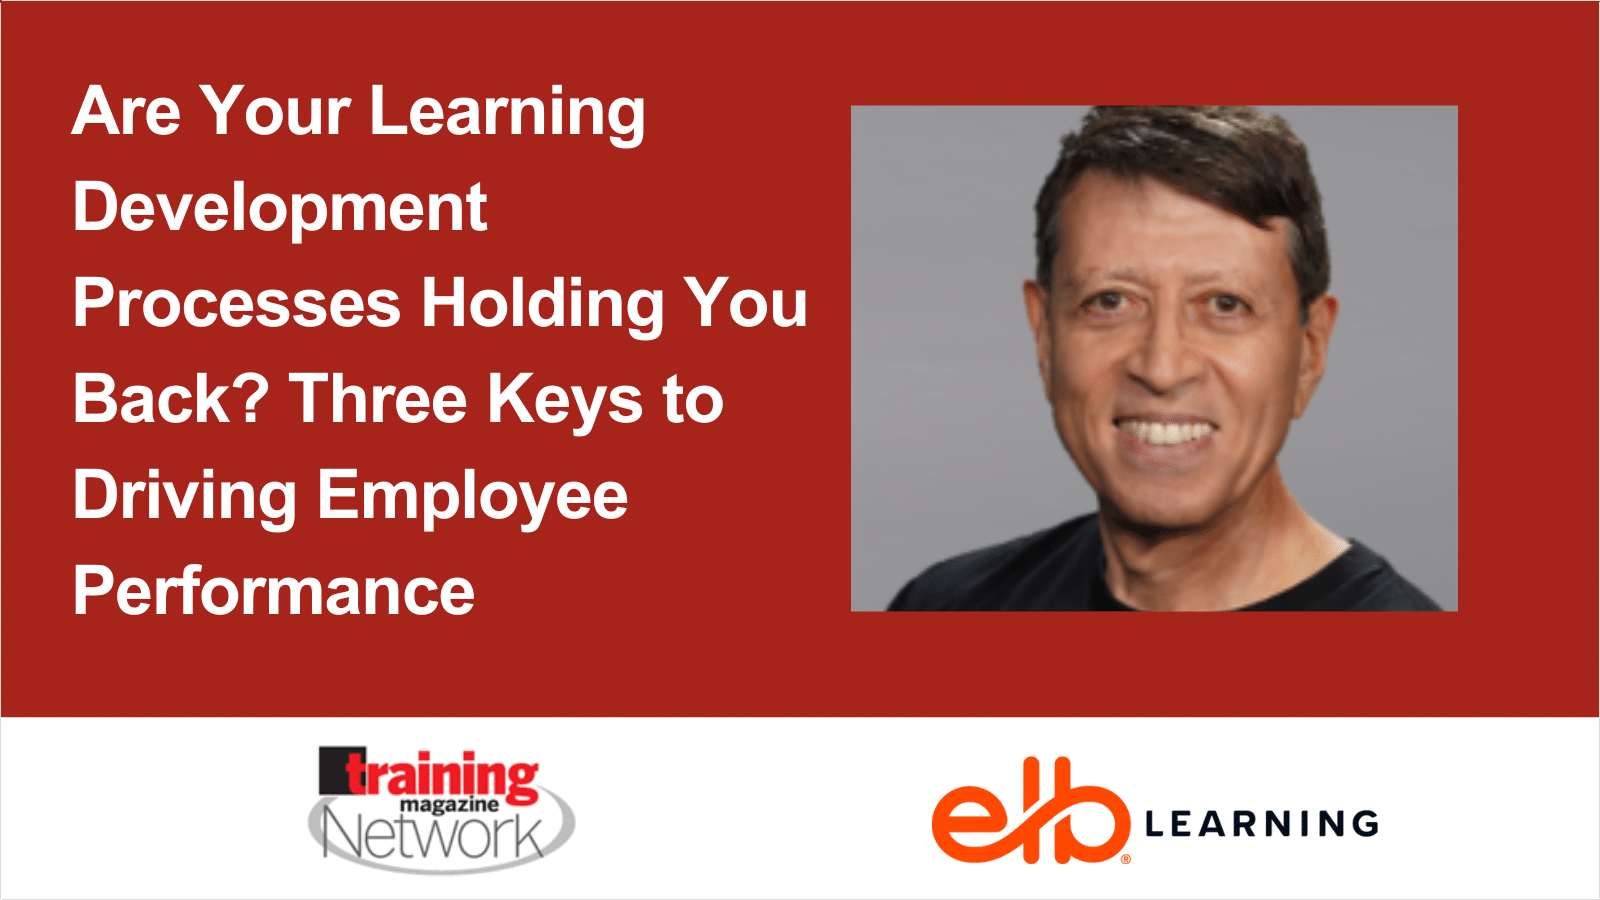 Webinar: Are Your Learning Development Processes Holding You Back? Three Keys to Driving Employee Performance